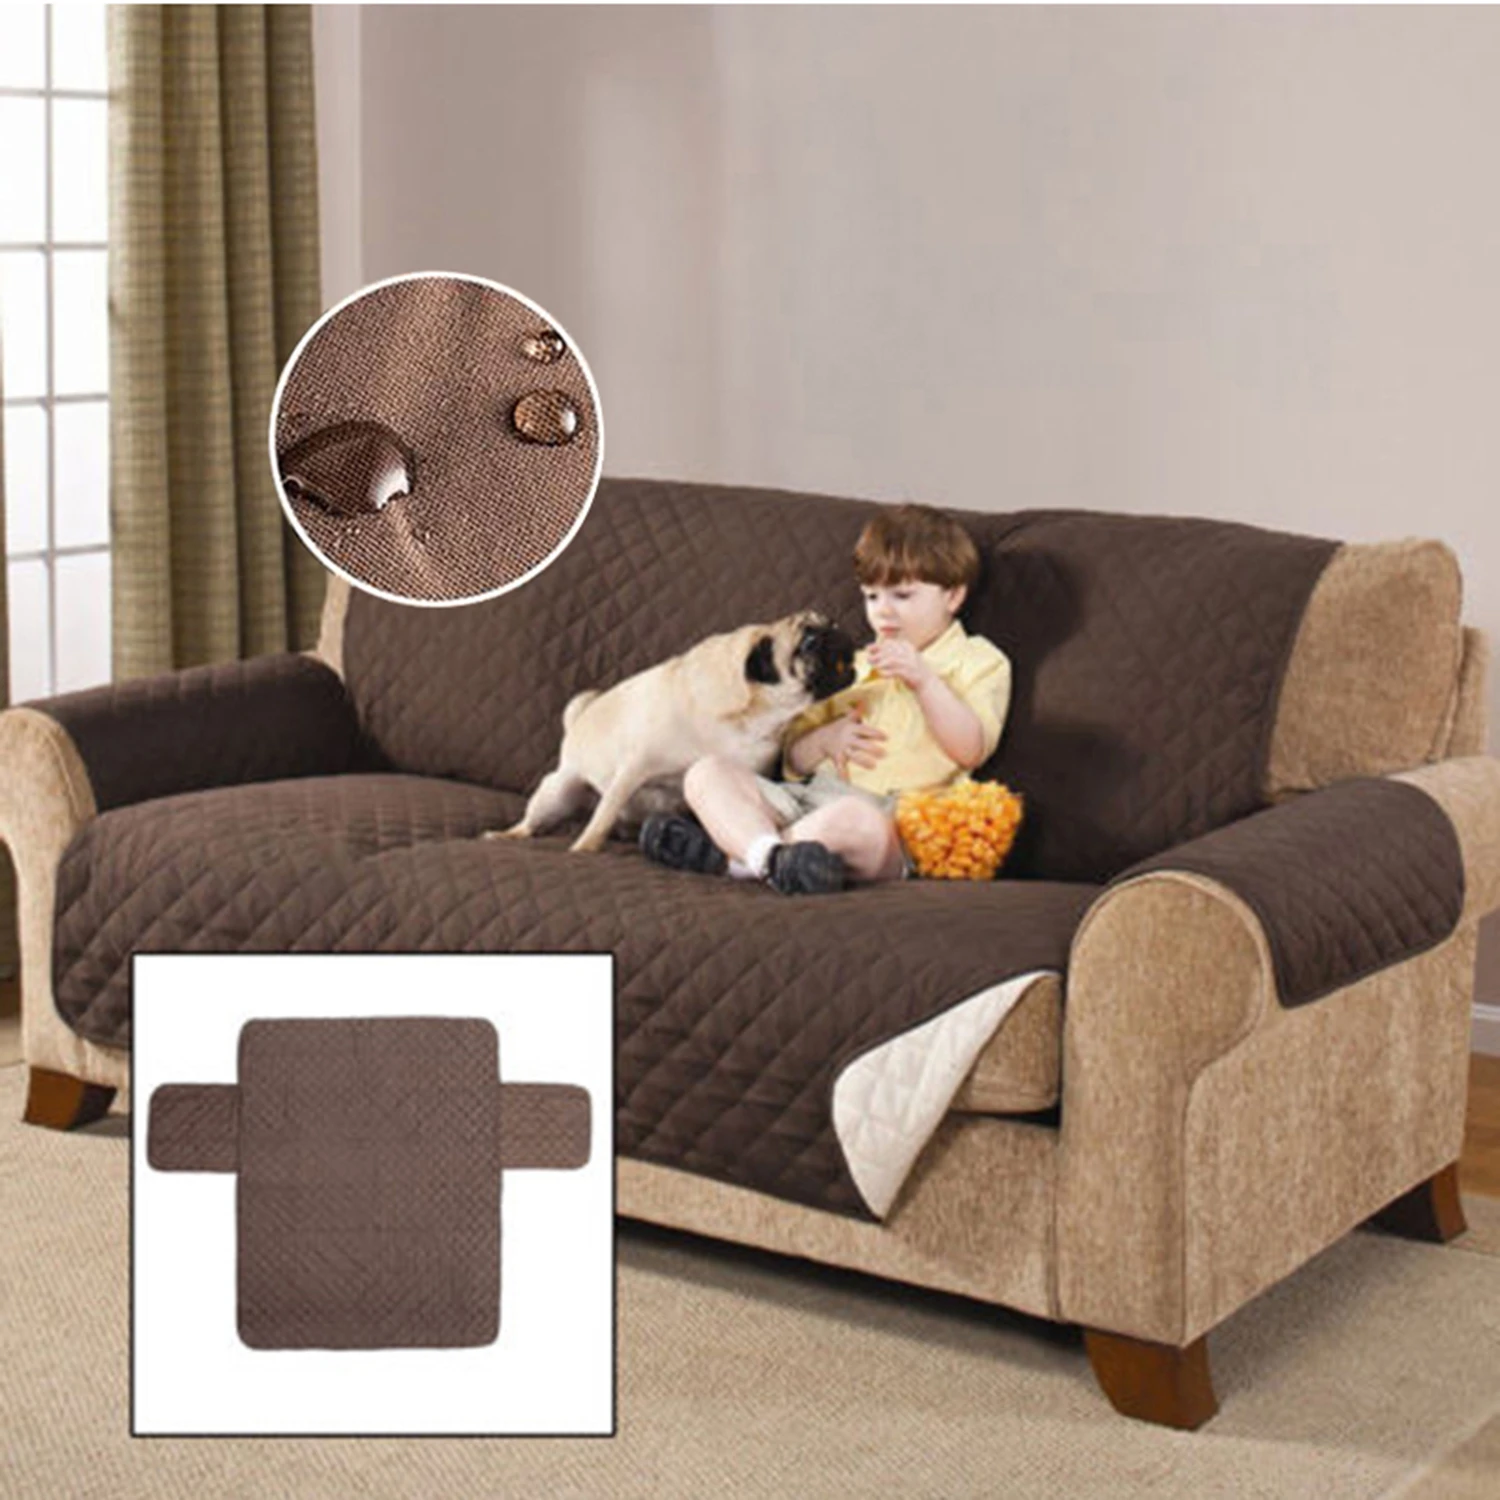 Waterproof Quilted Sofa Couch Cover Chair Pet Dog Kids Mat Furniture Protector